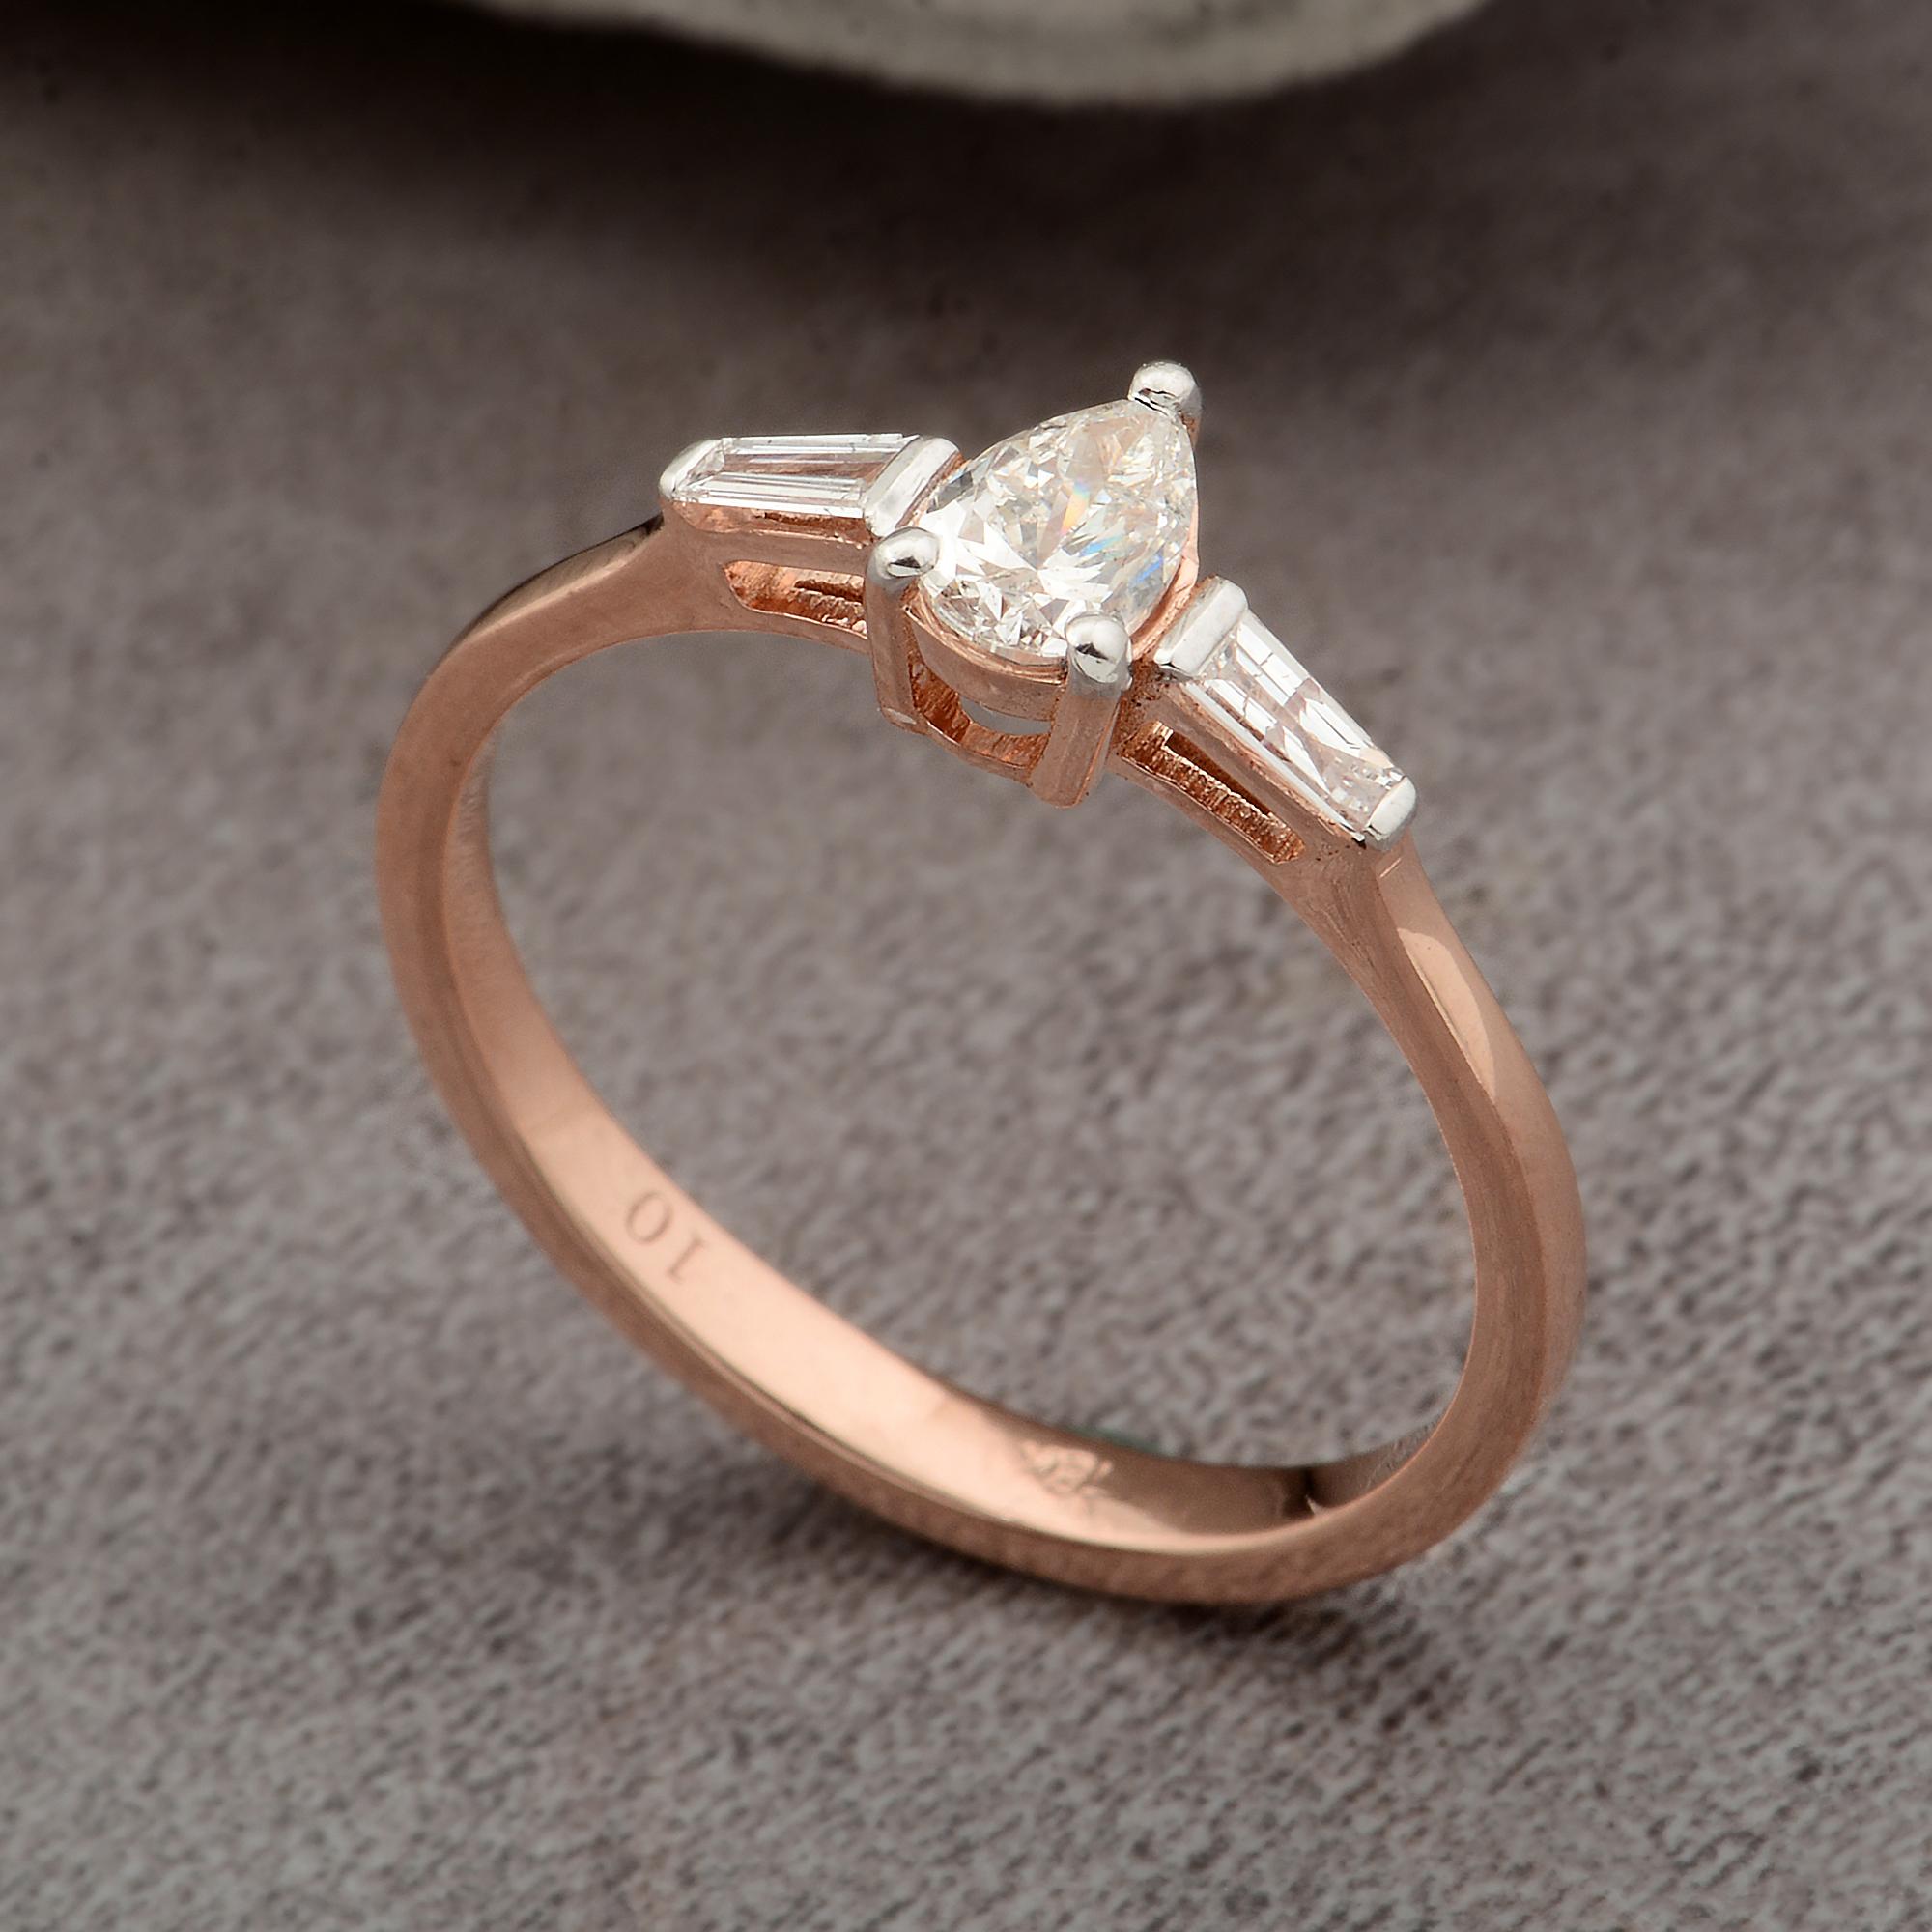 For Sale:  0.48 Carat Pear Baguette Diamond Band Ring Solid 18k Rose Gold Handmade Jewelry 4